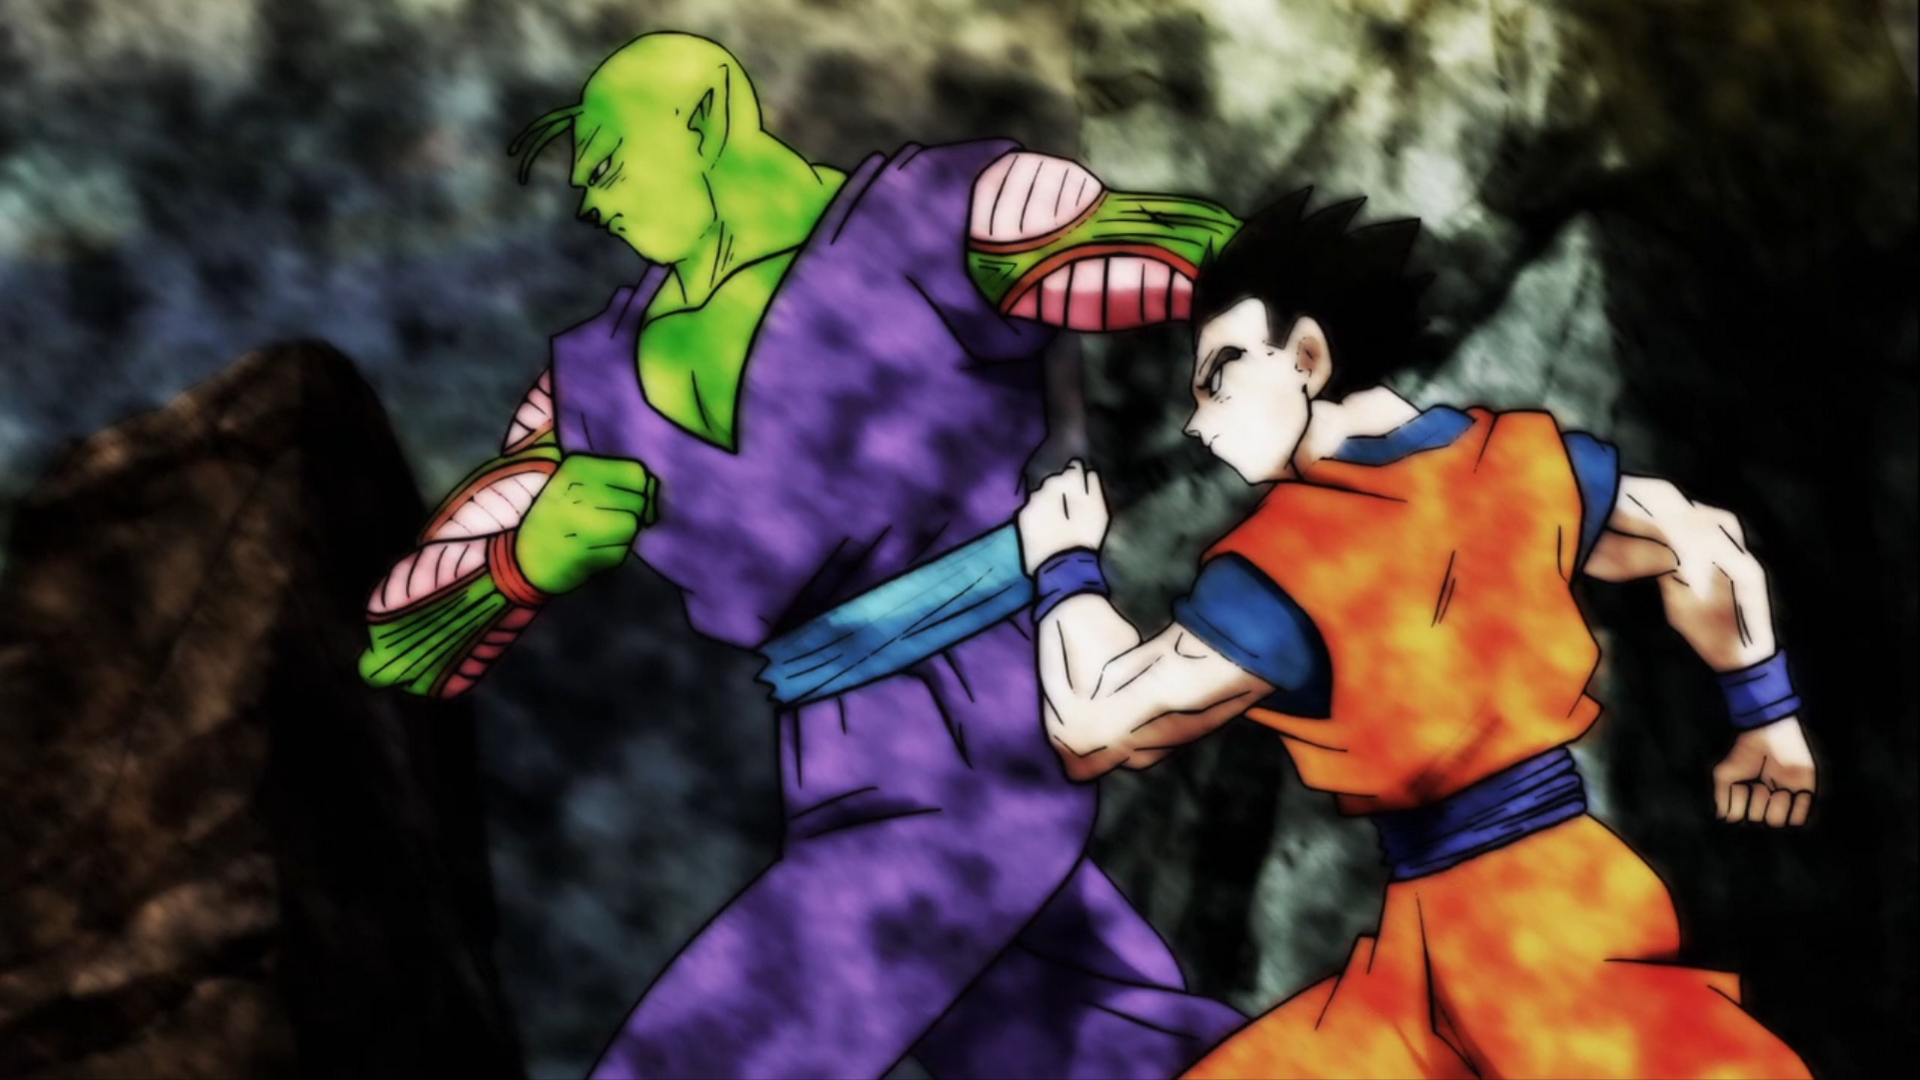 Gohan and Piccolo Image - ID: 157942 - Image Abyss.